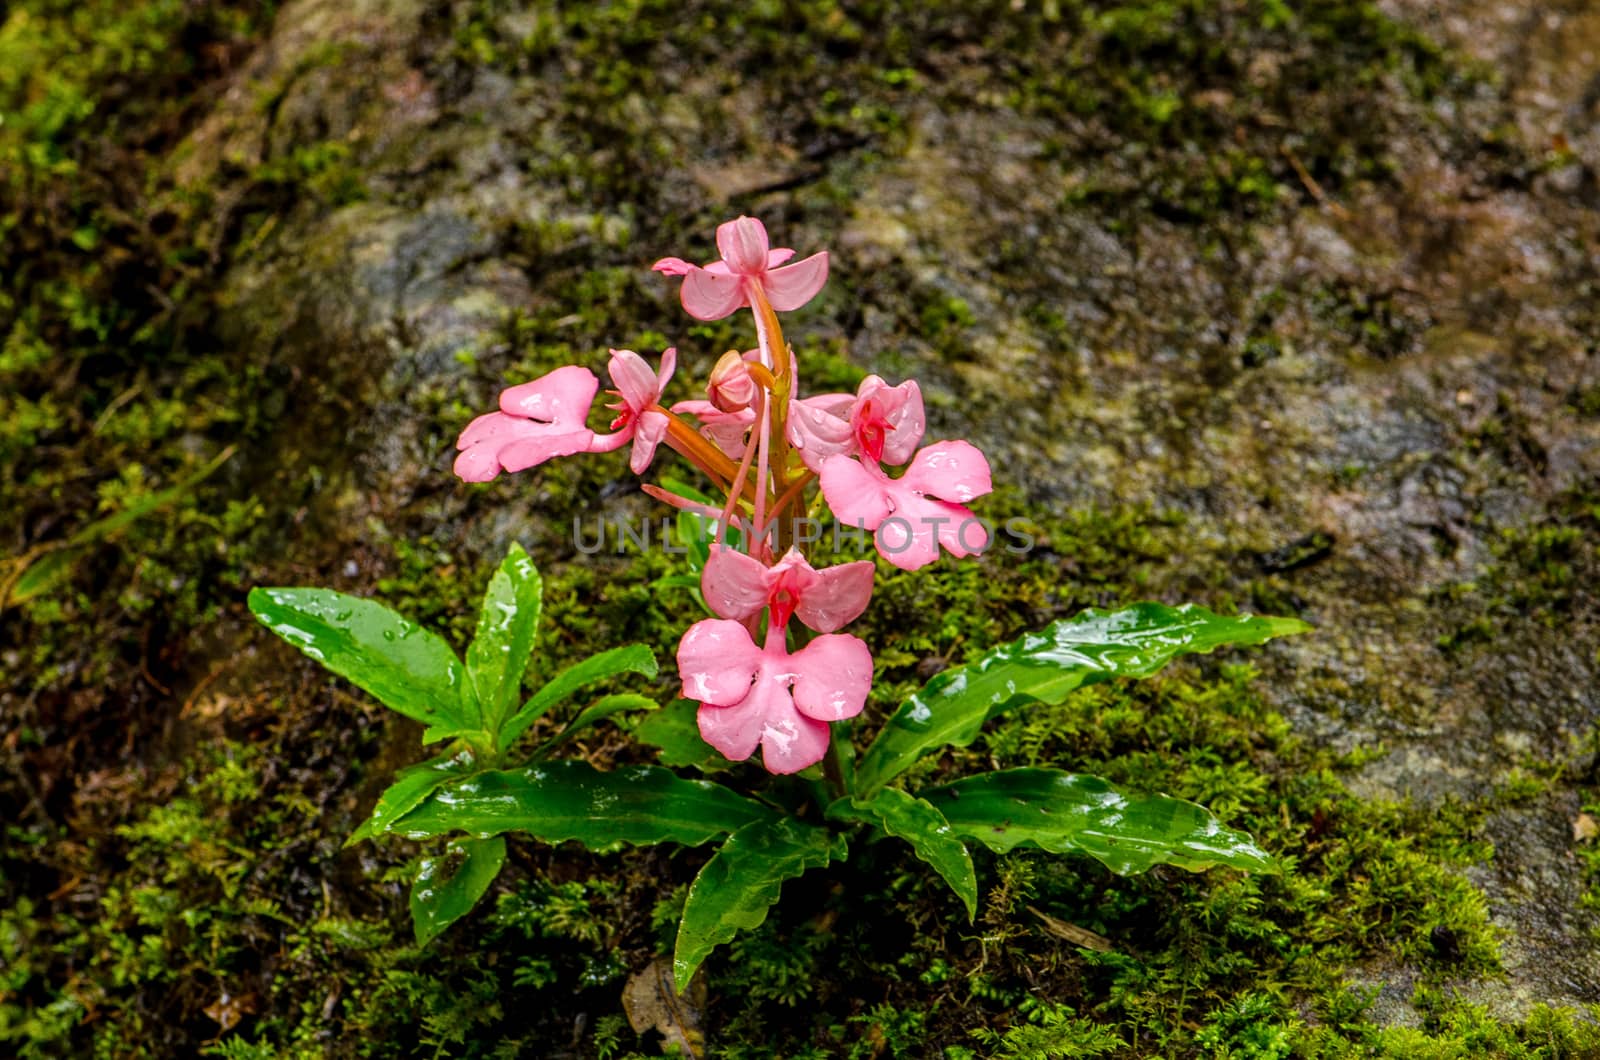 The Pink-Lipped Rhodocheila Habenaria (Pink Snap Dragon Flower) found in tropical rainforests at "Mundeang" waterfall in Phu hin rong kra national park,Phitsanulok province,Thailand,defocused